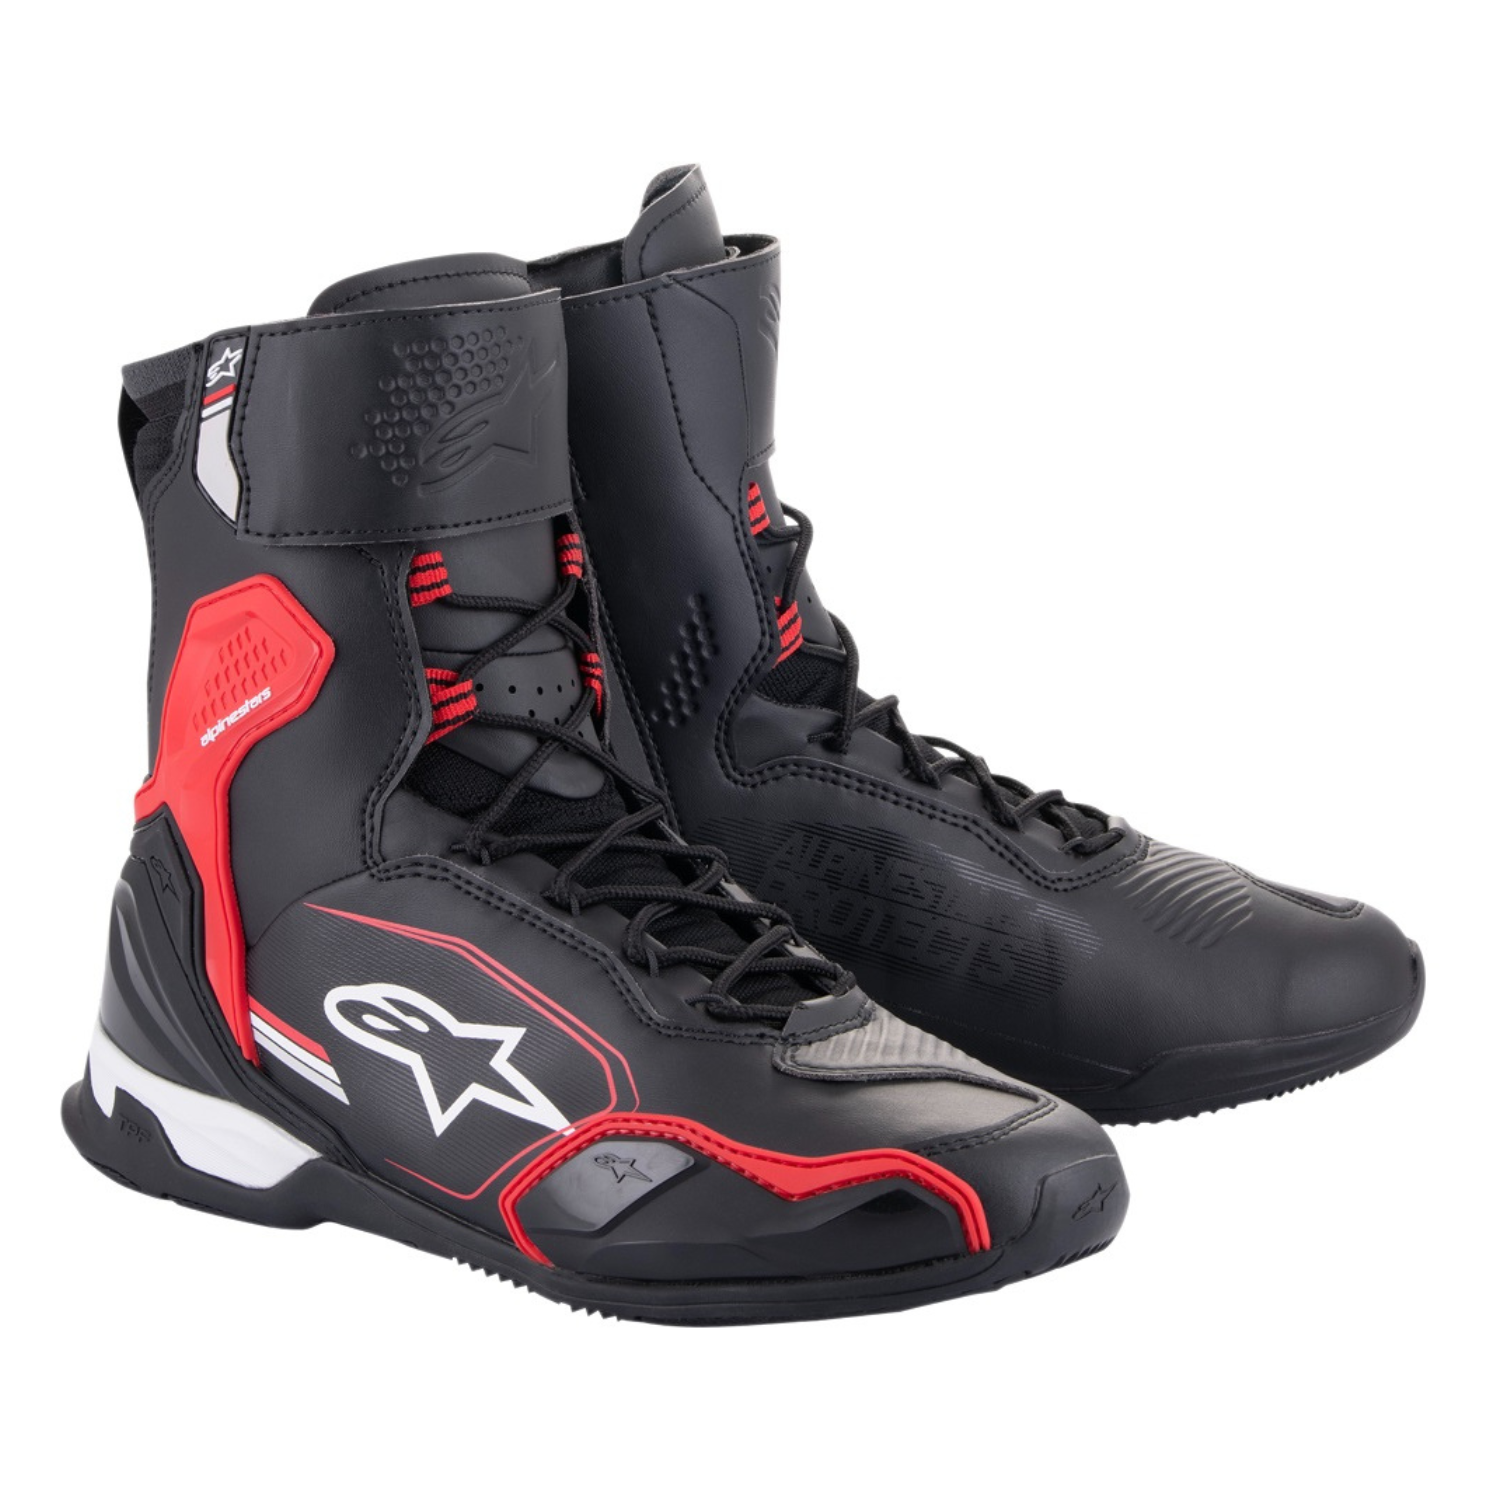 Image of Alpinestars Superfaster Shoes Black Bright Red White Size US 12 ID 8059347261010